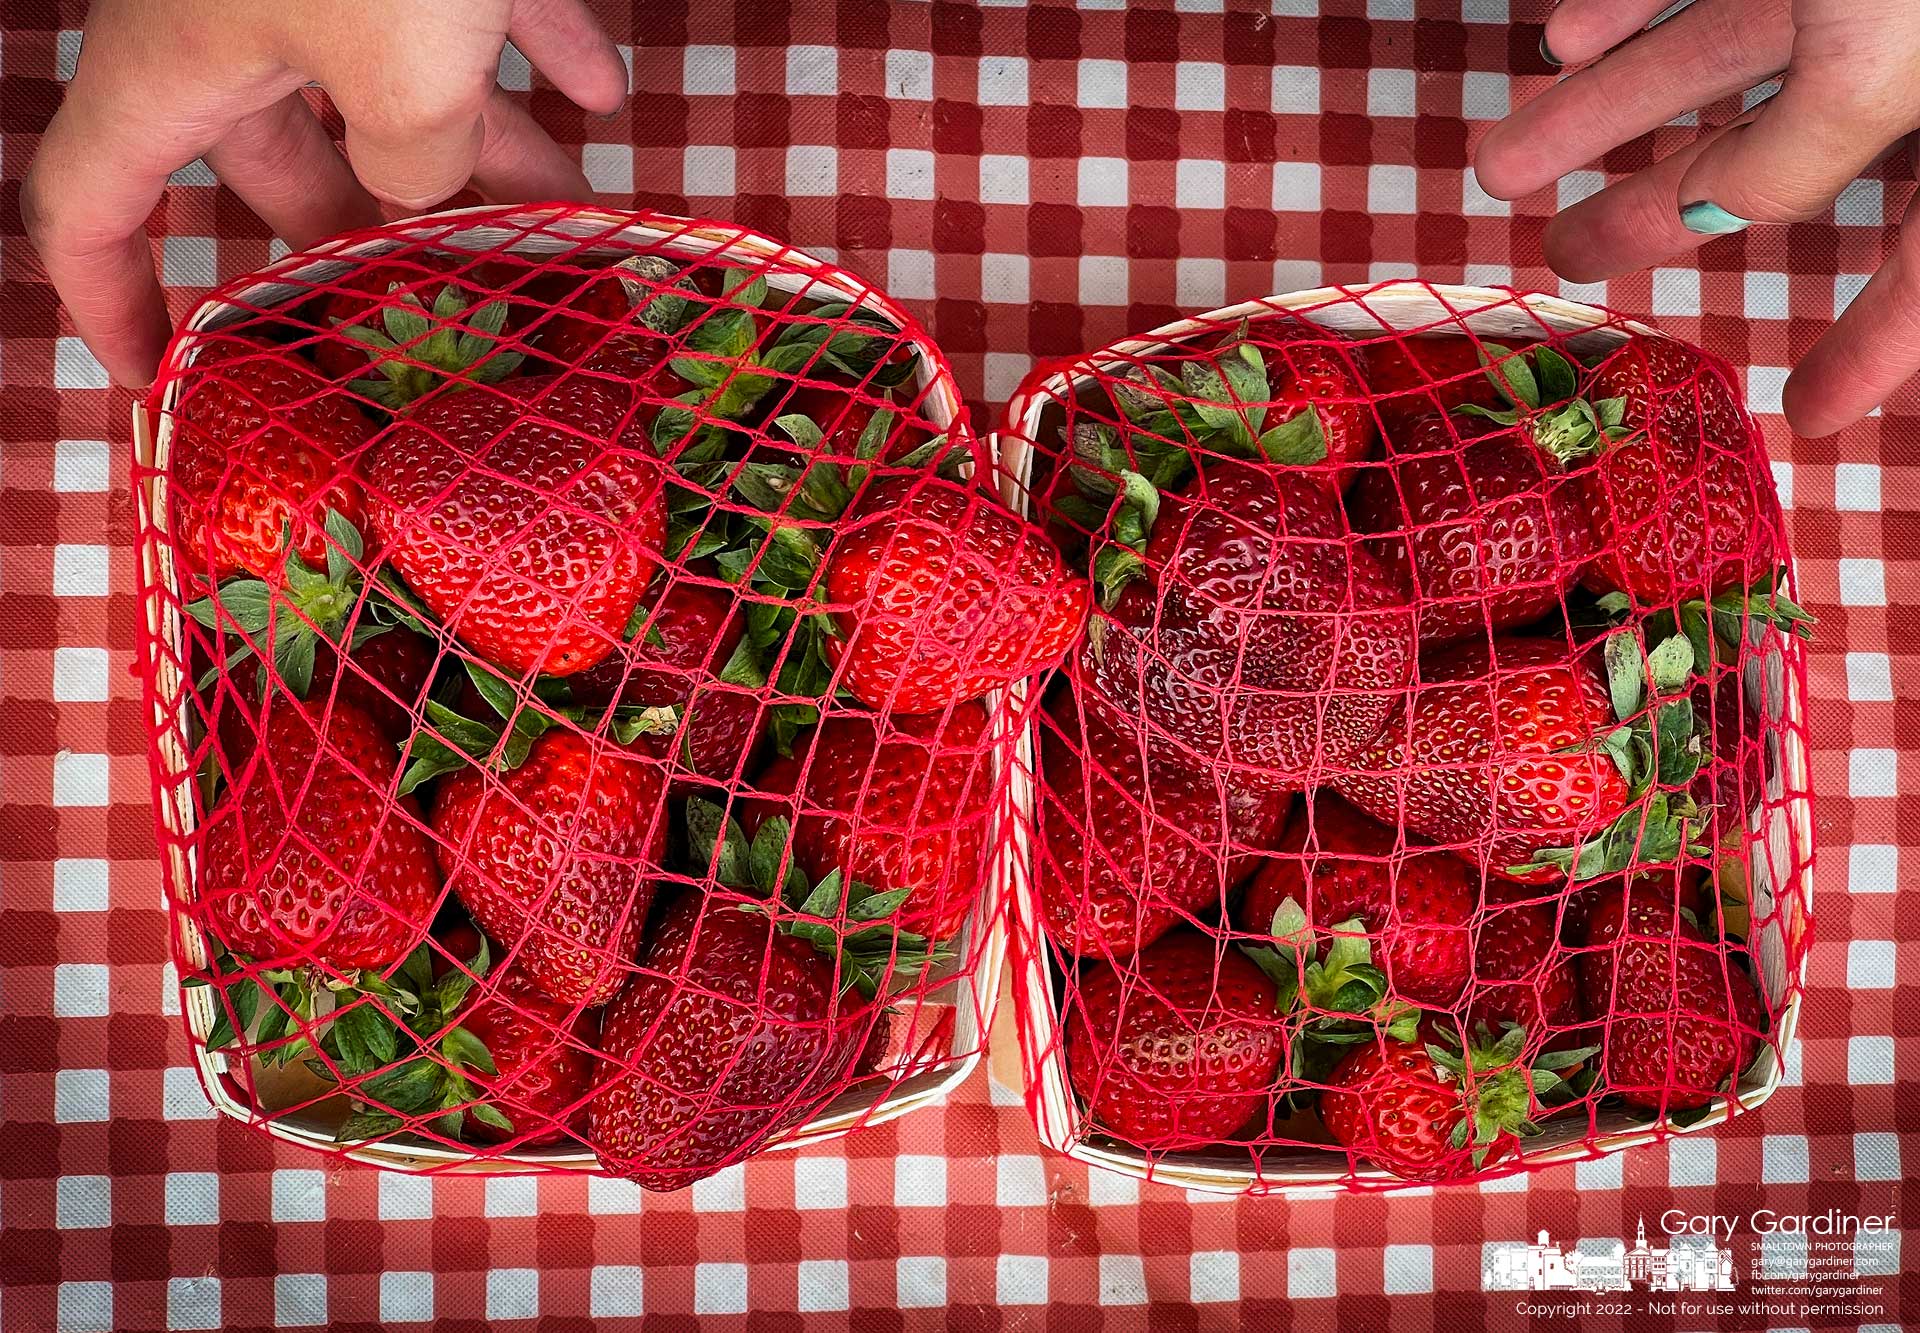 A vendor wraps two containers of strawberries with an elastic mesh to keep them from falling out of their containers as a customer at the Uptown Saturday Farmer's Market opened its season Saturday morning. My Final Photo for May 21, 2022.